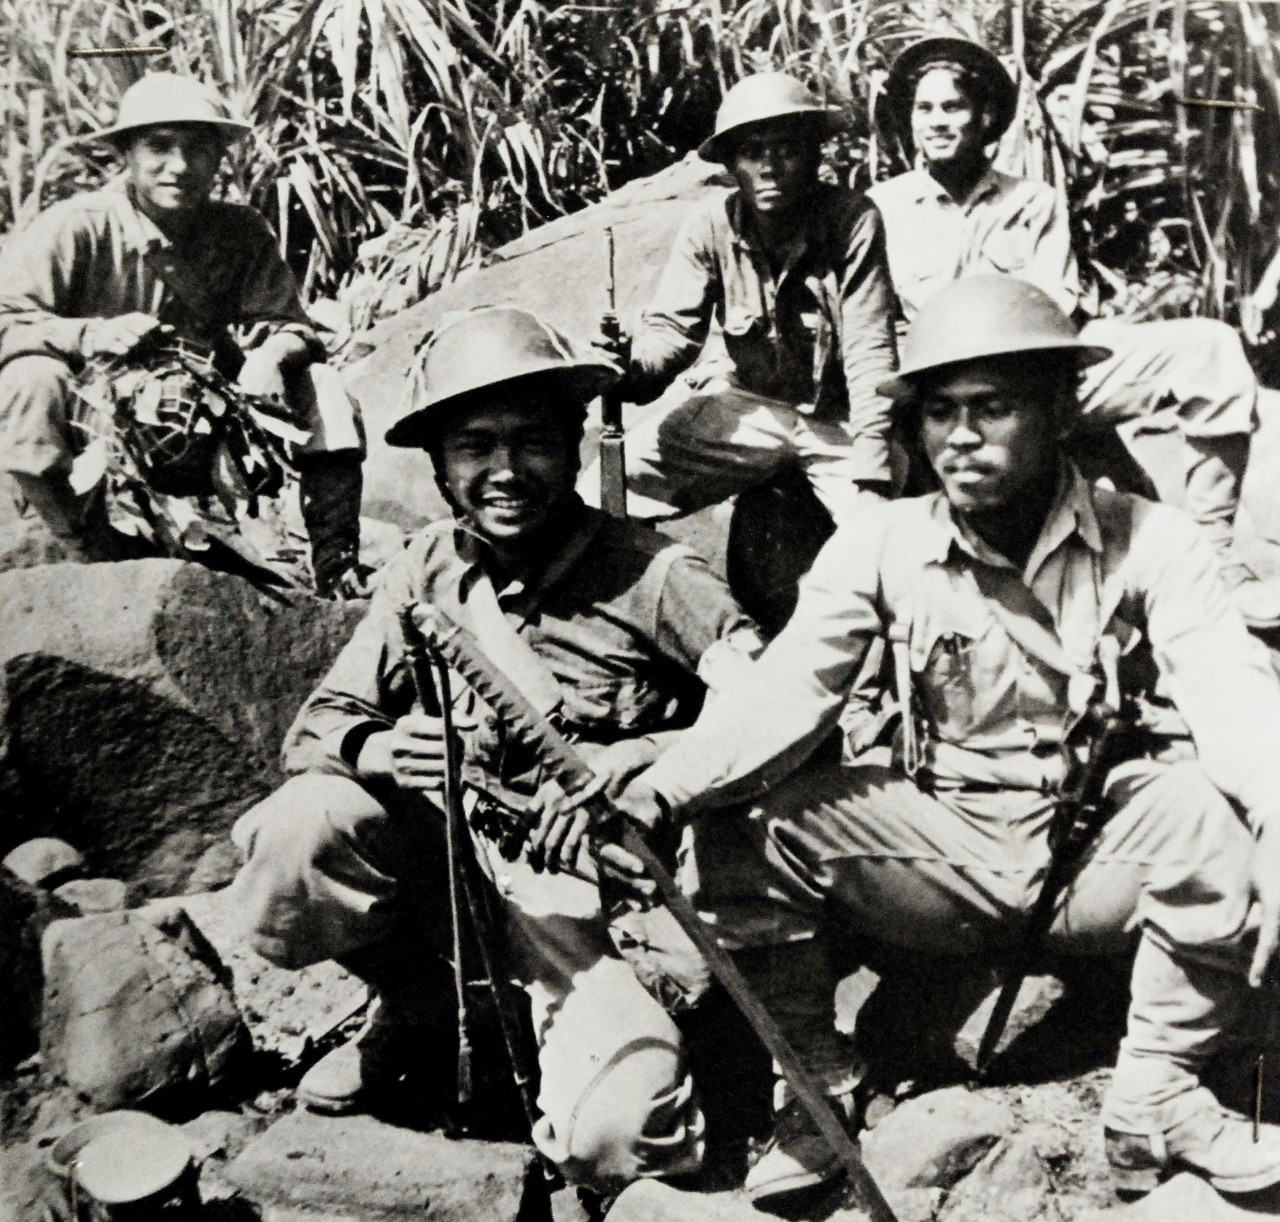 LC-Lot-9432-17: Battle of Bataan, January–April 1942.  These Filipinos Mopped-Up a Japanese Landing Party.  This handful of Filipino Scouts had just mopped up a Japanese landing party when the picture was made on the Philippines’ Bataan Peninsula. One of the Scouts holds a Samurai sword, which was taken from Japanese officer who was slain in the fight.  Courageous men like these were an important factor in enabling the American and Filipino forces to hold Bataan, in the face of tremendous odds, for more than three months – long after it had been written off by outside military experts.  Office of War Information Photograph, 9-15 April 1942.  Original photograph is small.  Courtesy of the Library of Congress.  (2015/12/18).